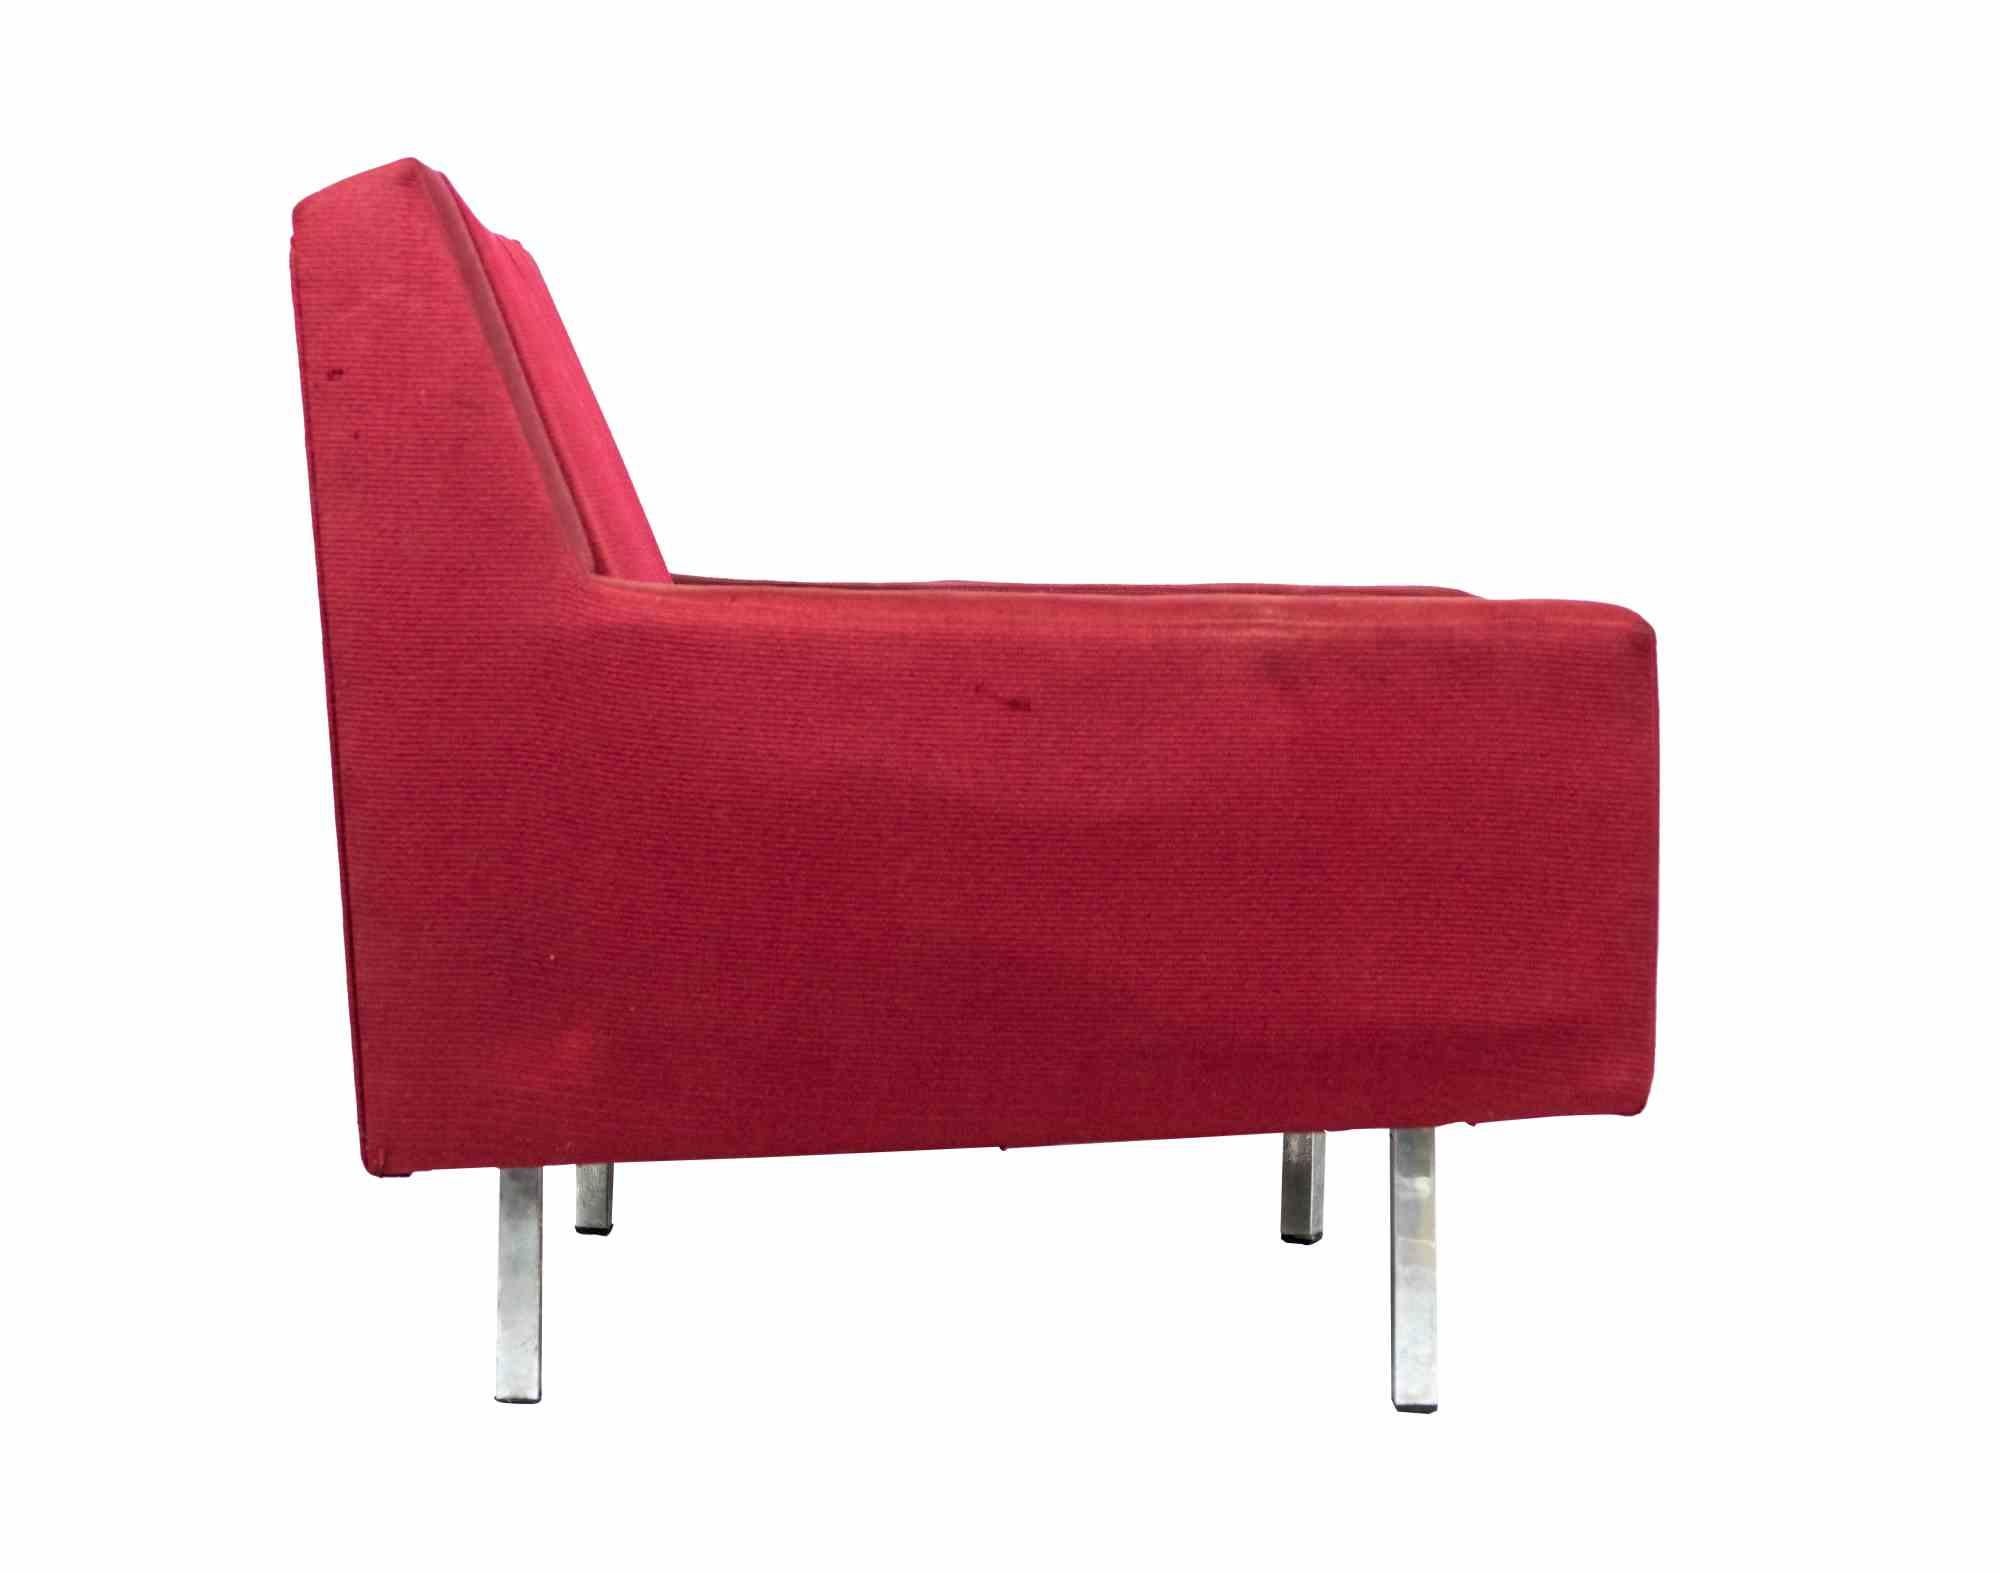 Florence Knoll lounge chair is an original design furniture item realized for Knoll in the 1970s

Red fabric colored armchair.

Red iconic armchair this is an expression of the rational design approach Florence Knoll learned from her mentor,